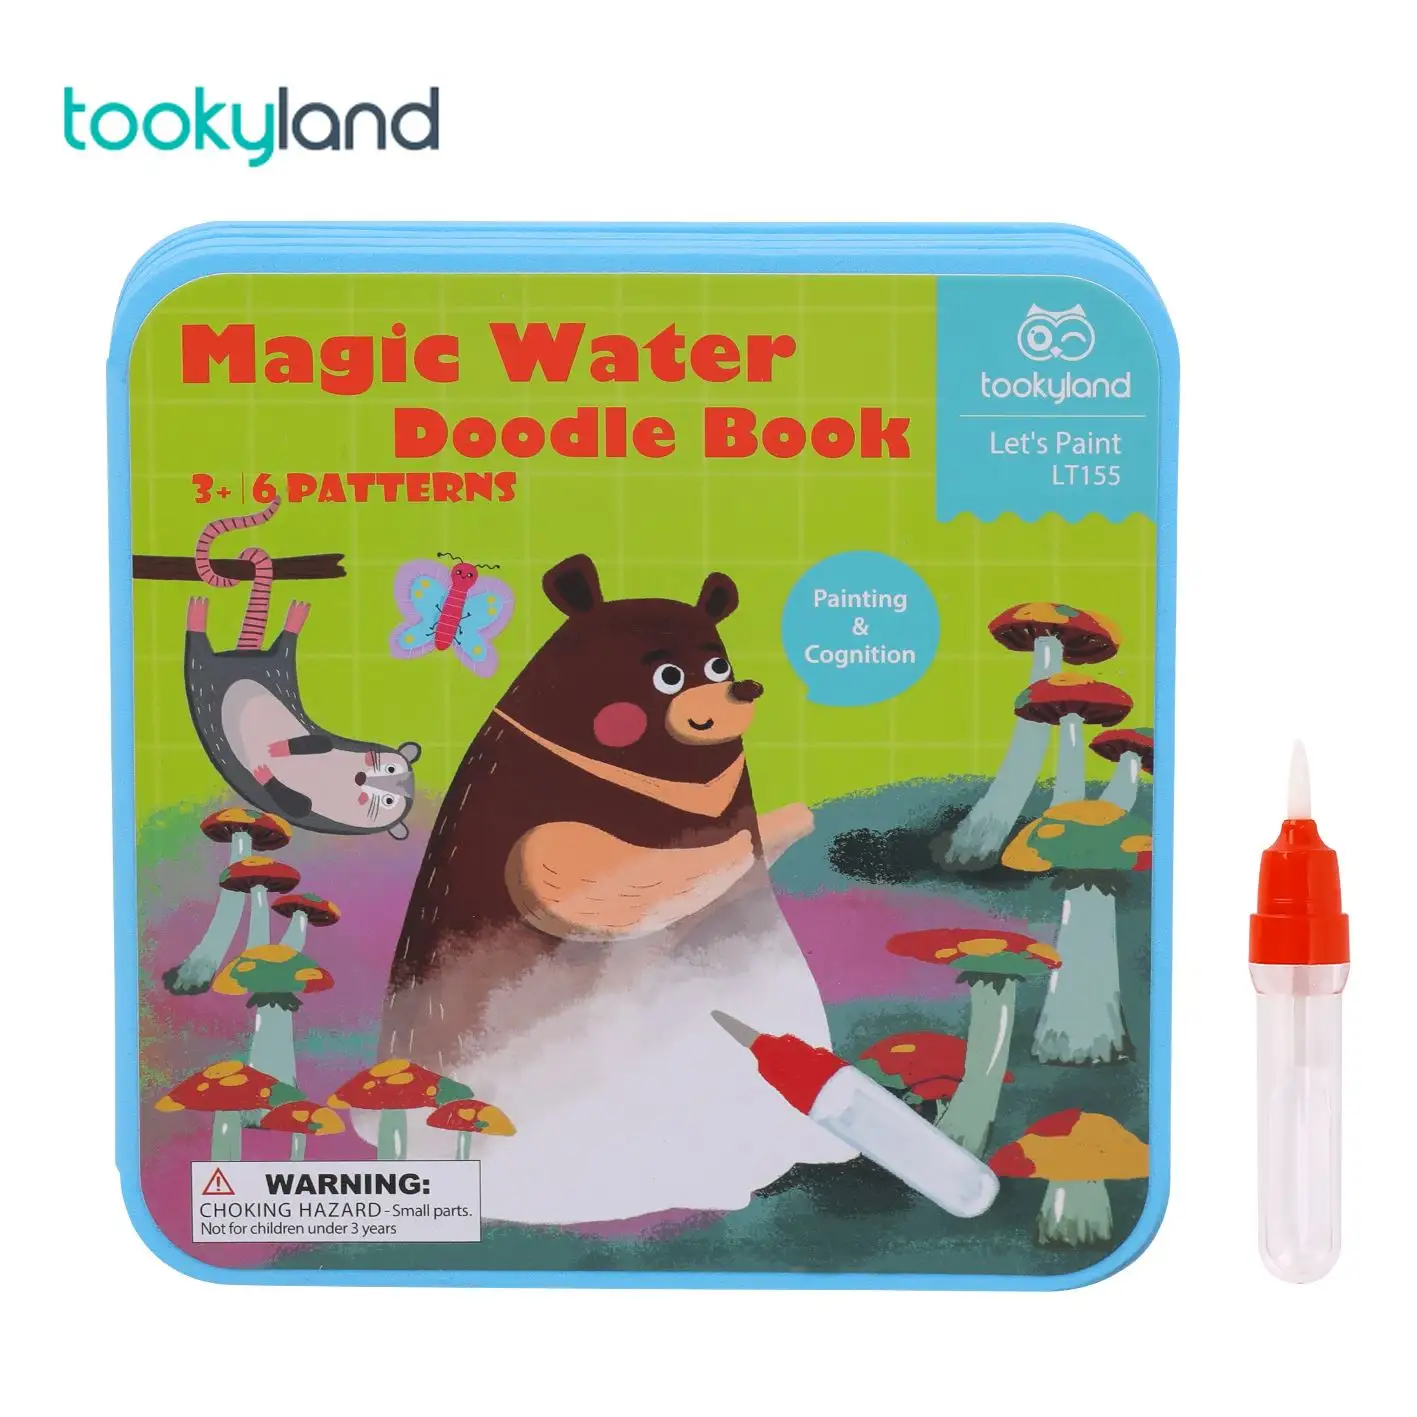 Magic Water Doodle Book Fun Cognition Book for kids Drawing Painting Book